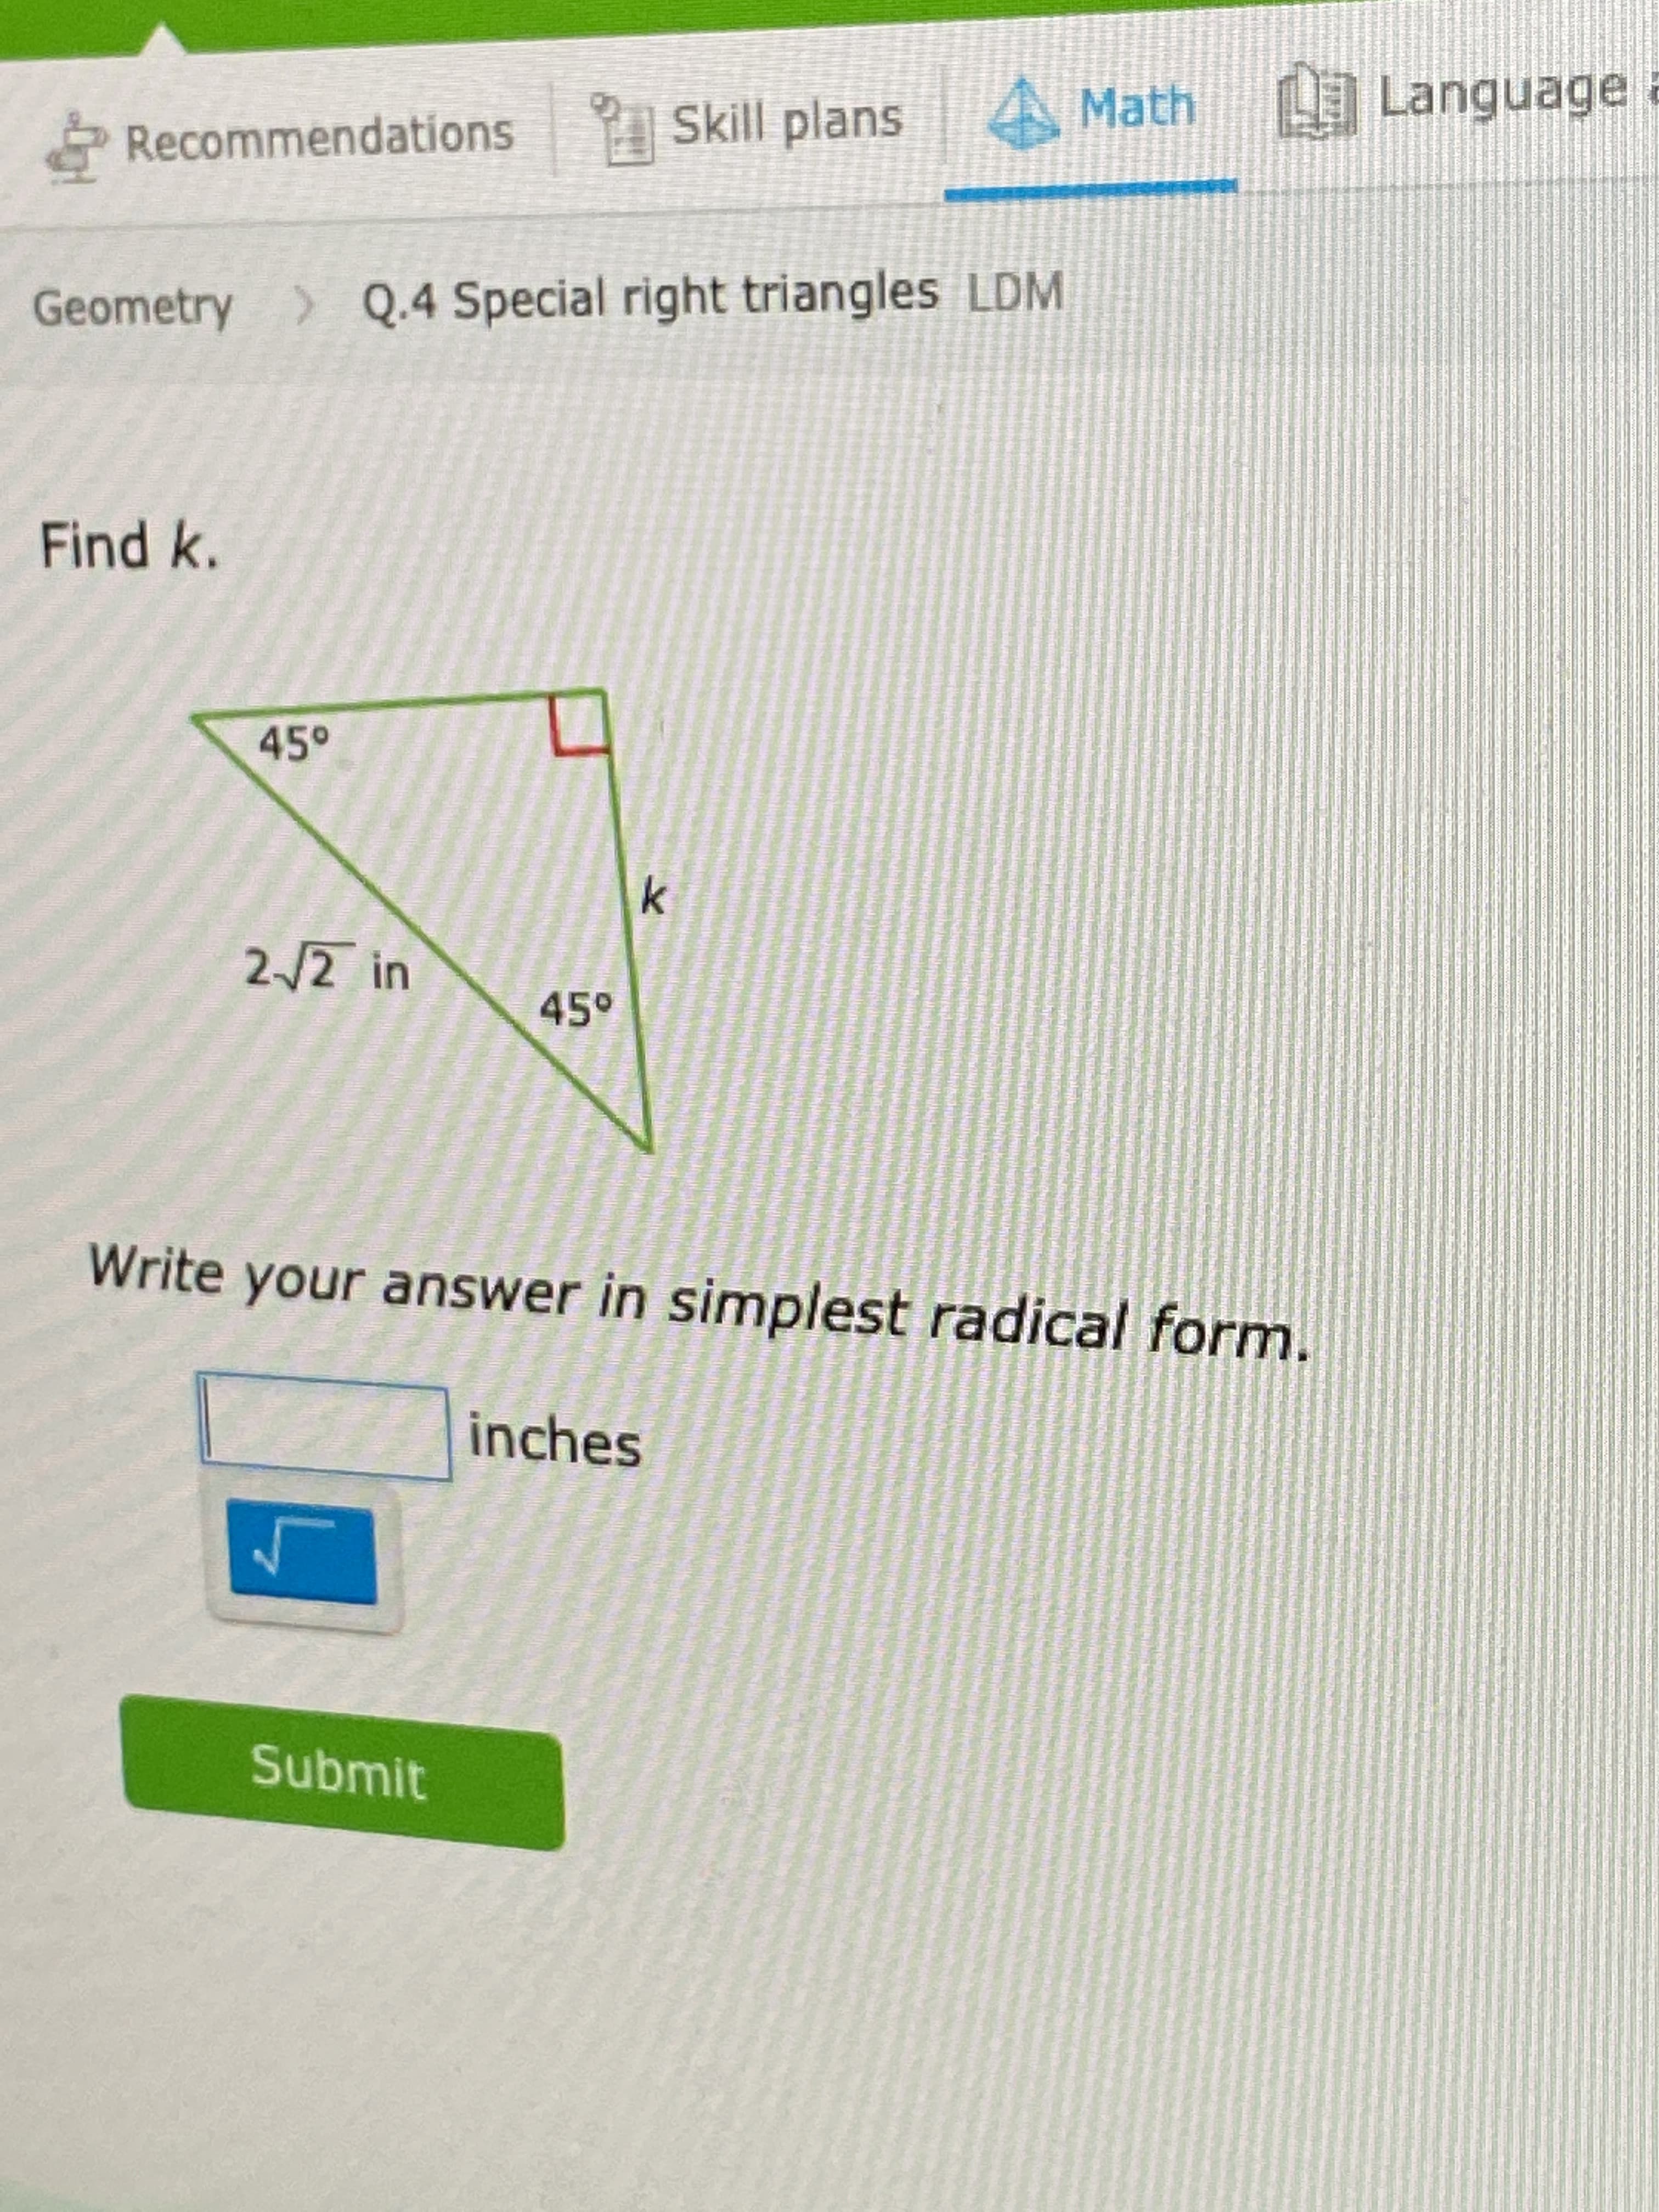 AMath Language a
Recommendations Skill plans
Geometry > Q.4 Special right triangles LDM
Find k.
45°
2/2 in
45°
Write your answer in simplest radical form.
inches
Submit
